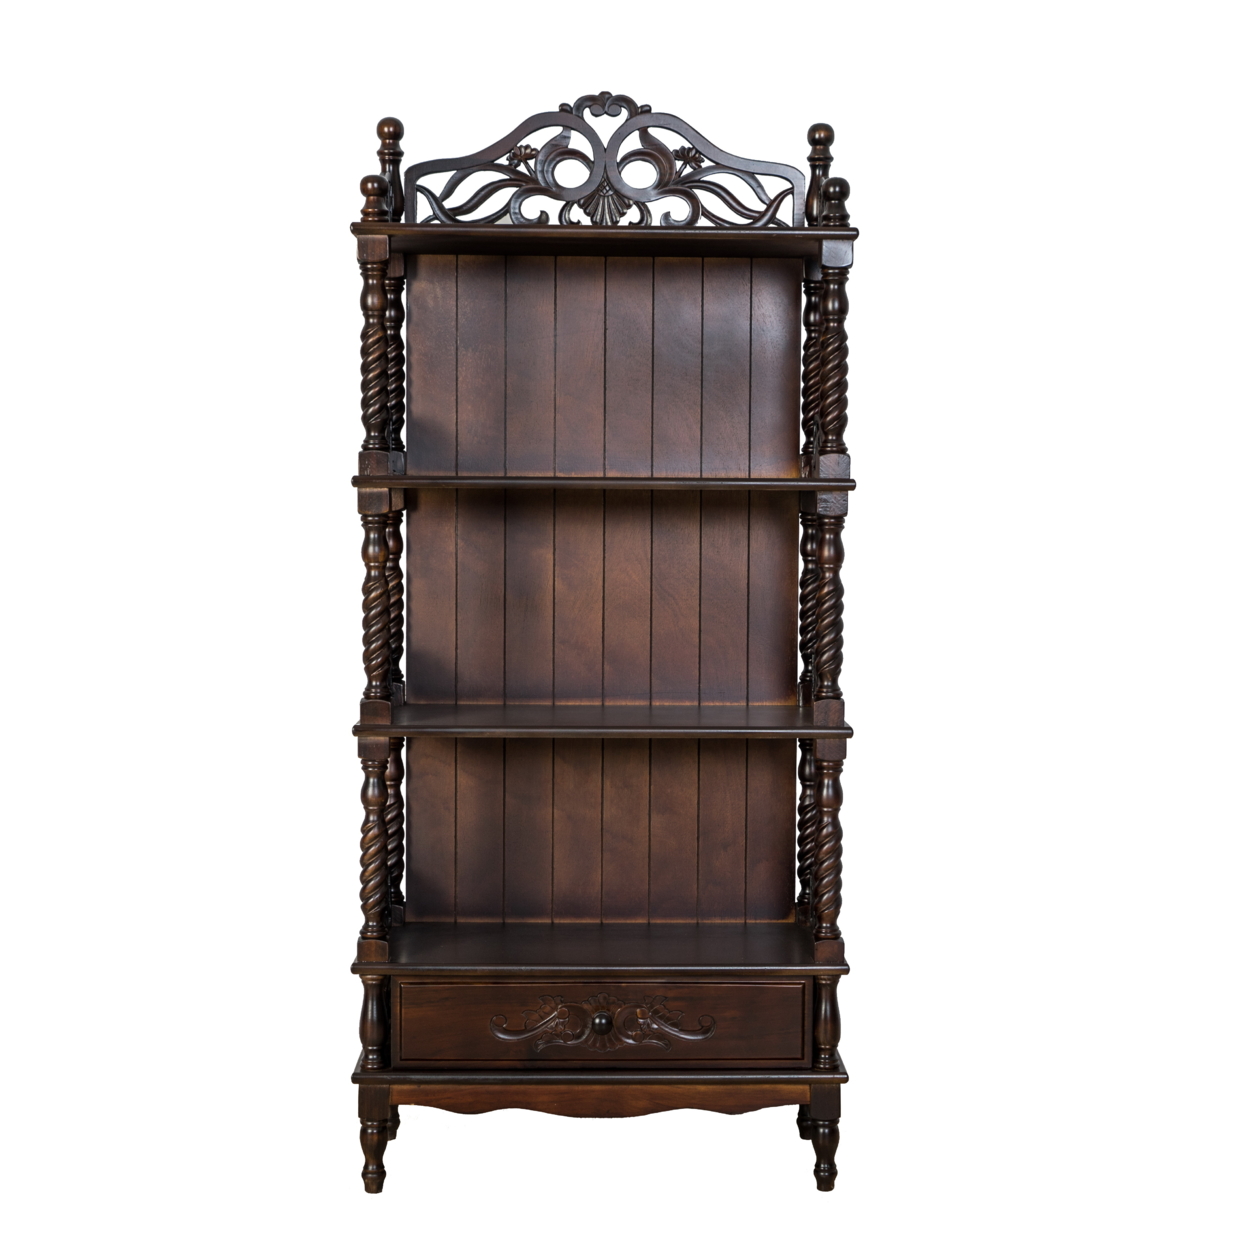 Wooden Bookcase Shelf With Carved Details And Filigree Accents, Brown- Saltoro Sherpi